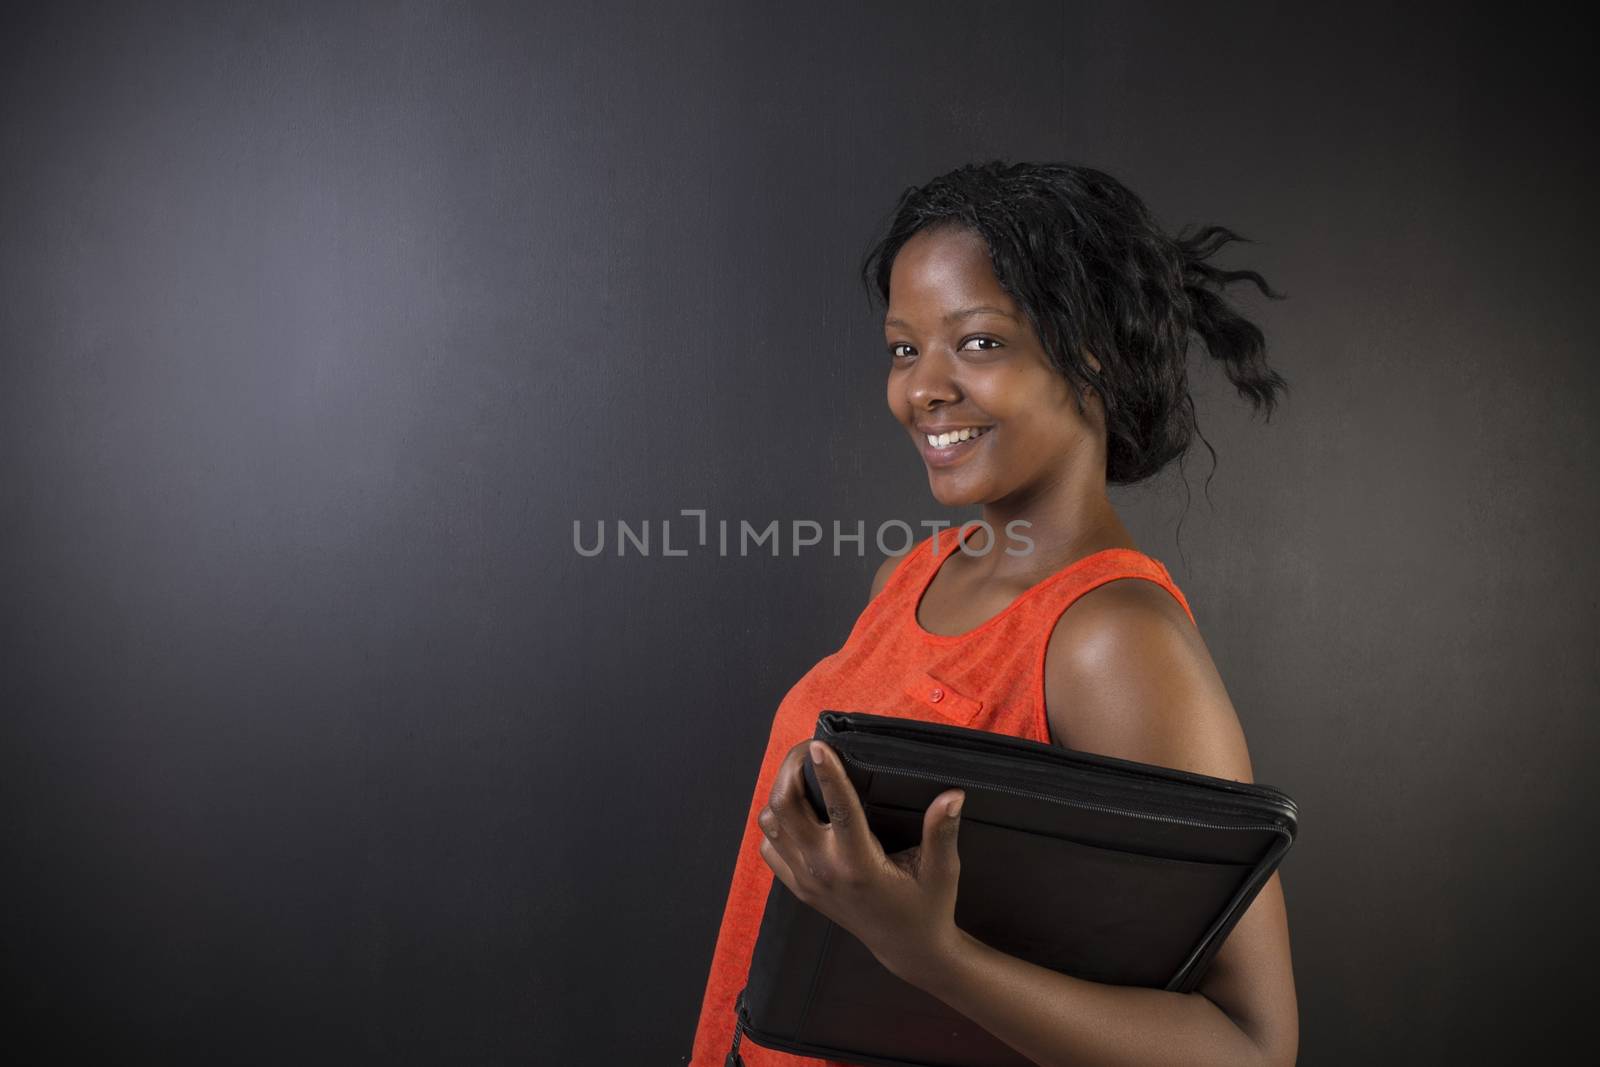 South African or African American woman teacher or student with notepad against a blackboard background